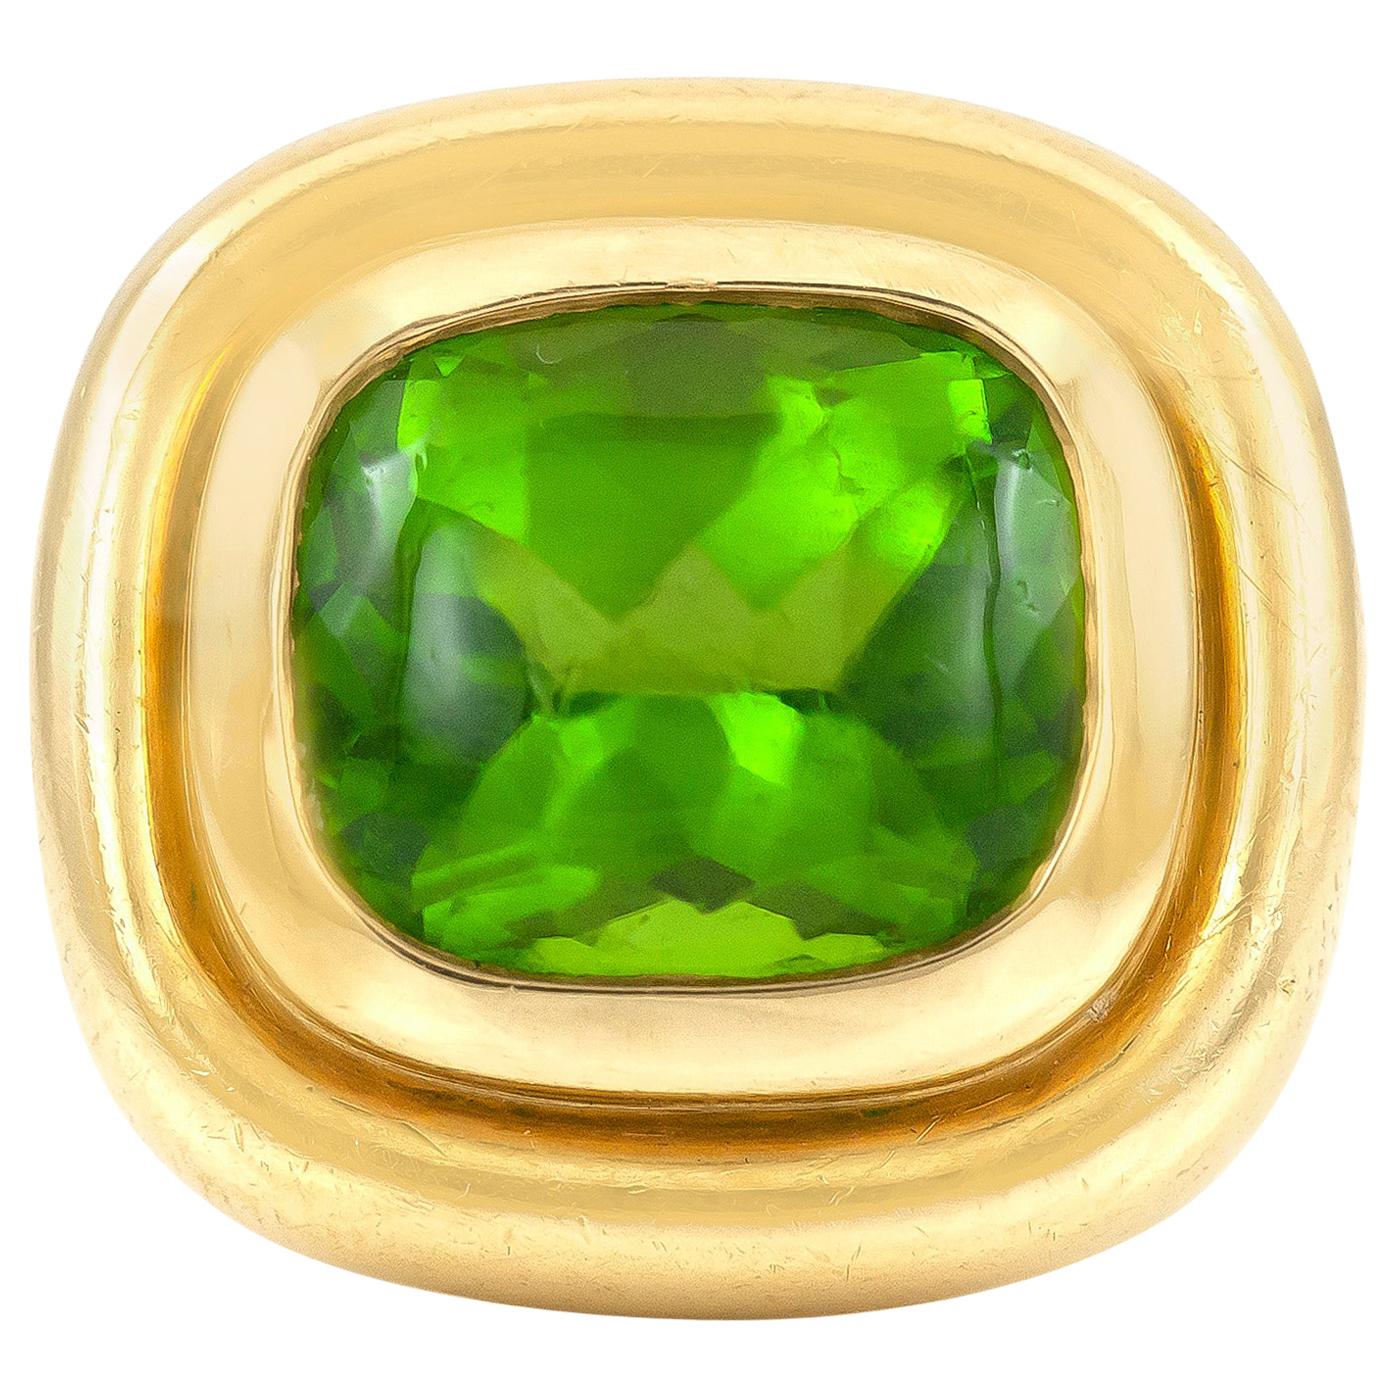 Emerald: The Benefits of the Prosperity Stone